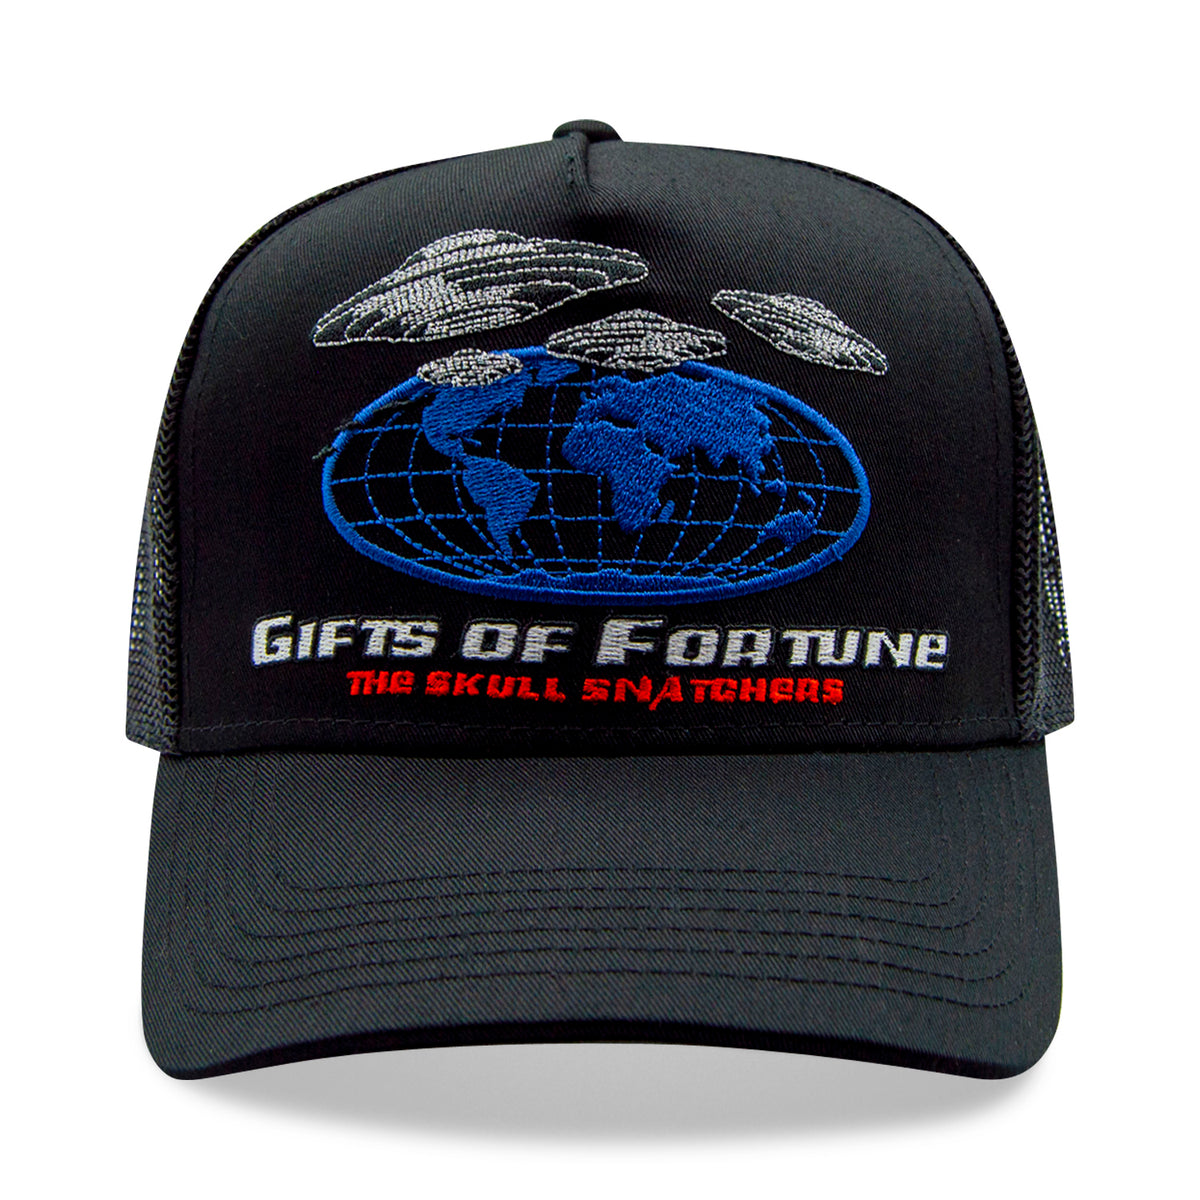 Out of This World Trucker Hat | Black